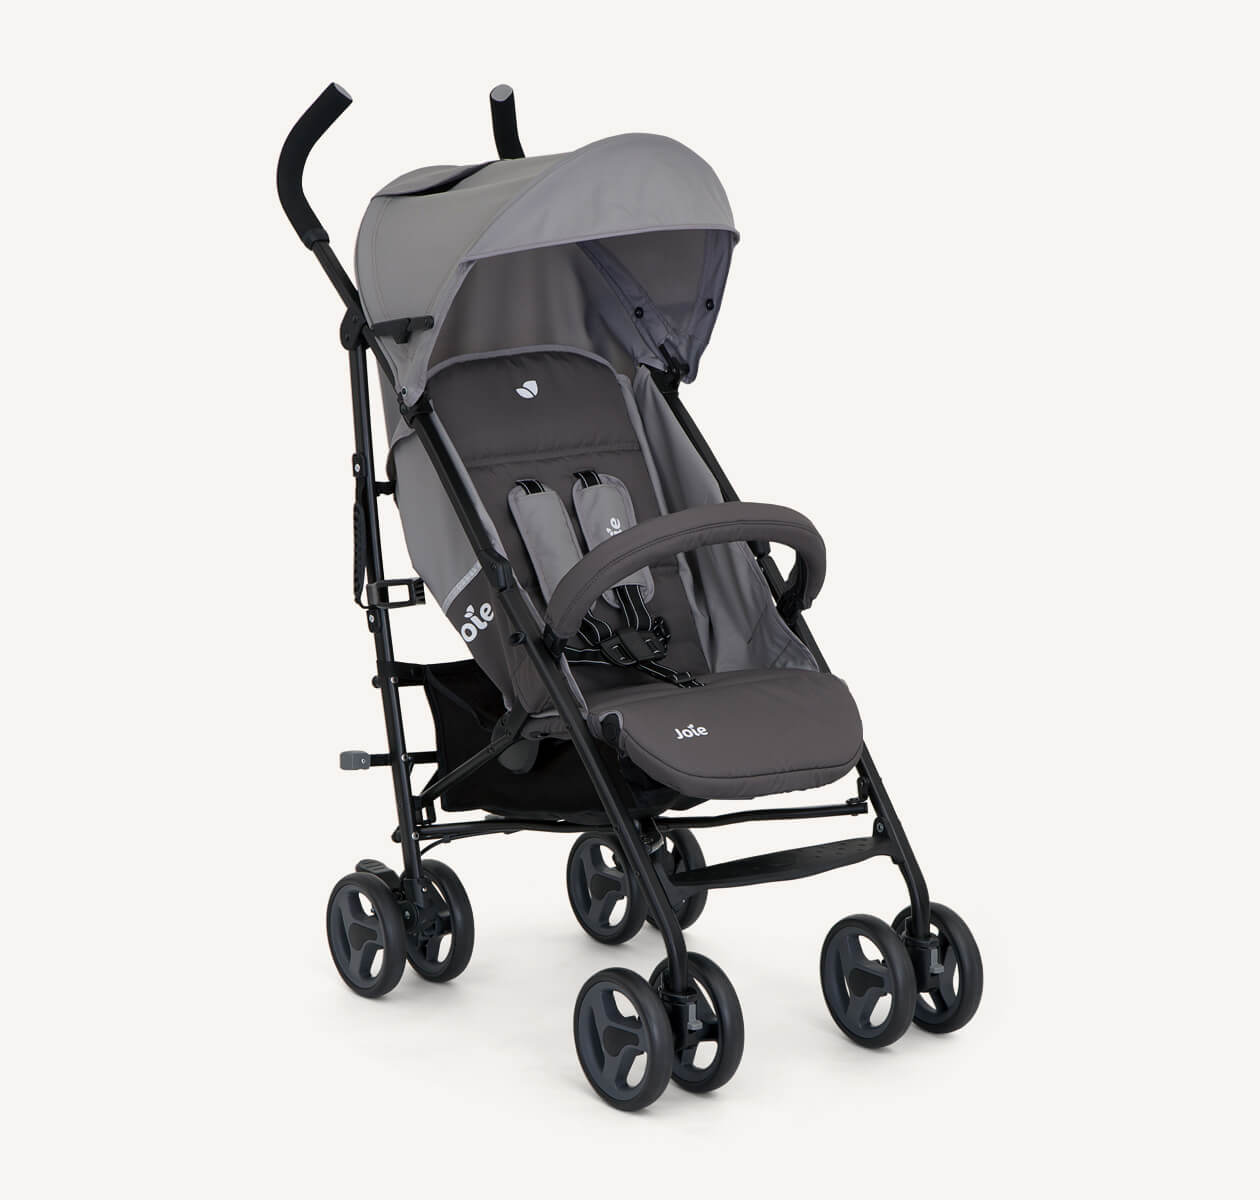 Joie light gray nitro lx stroller positioned at a right angle.